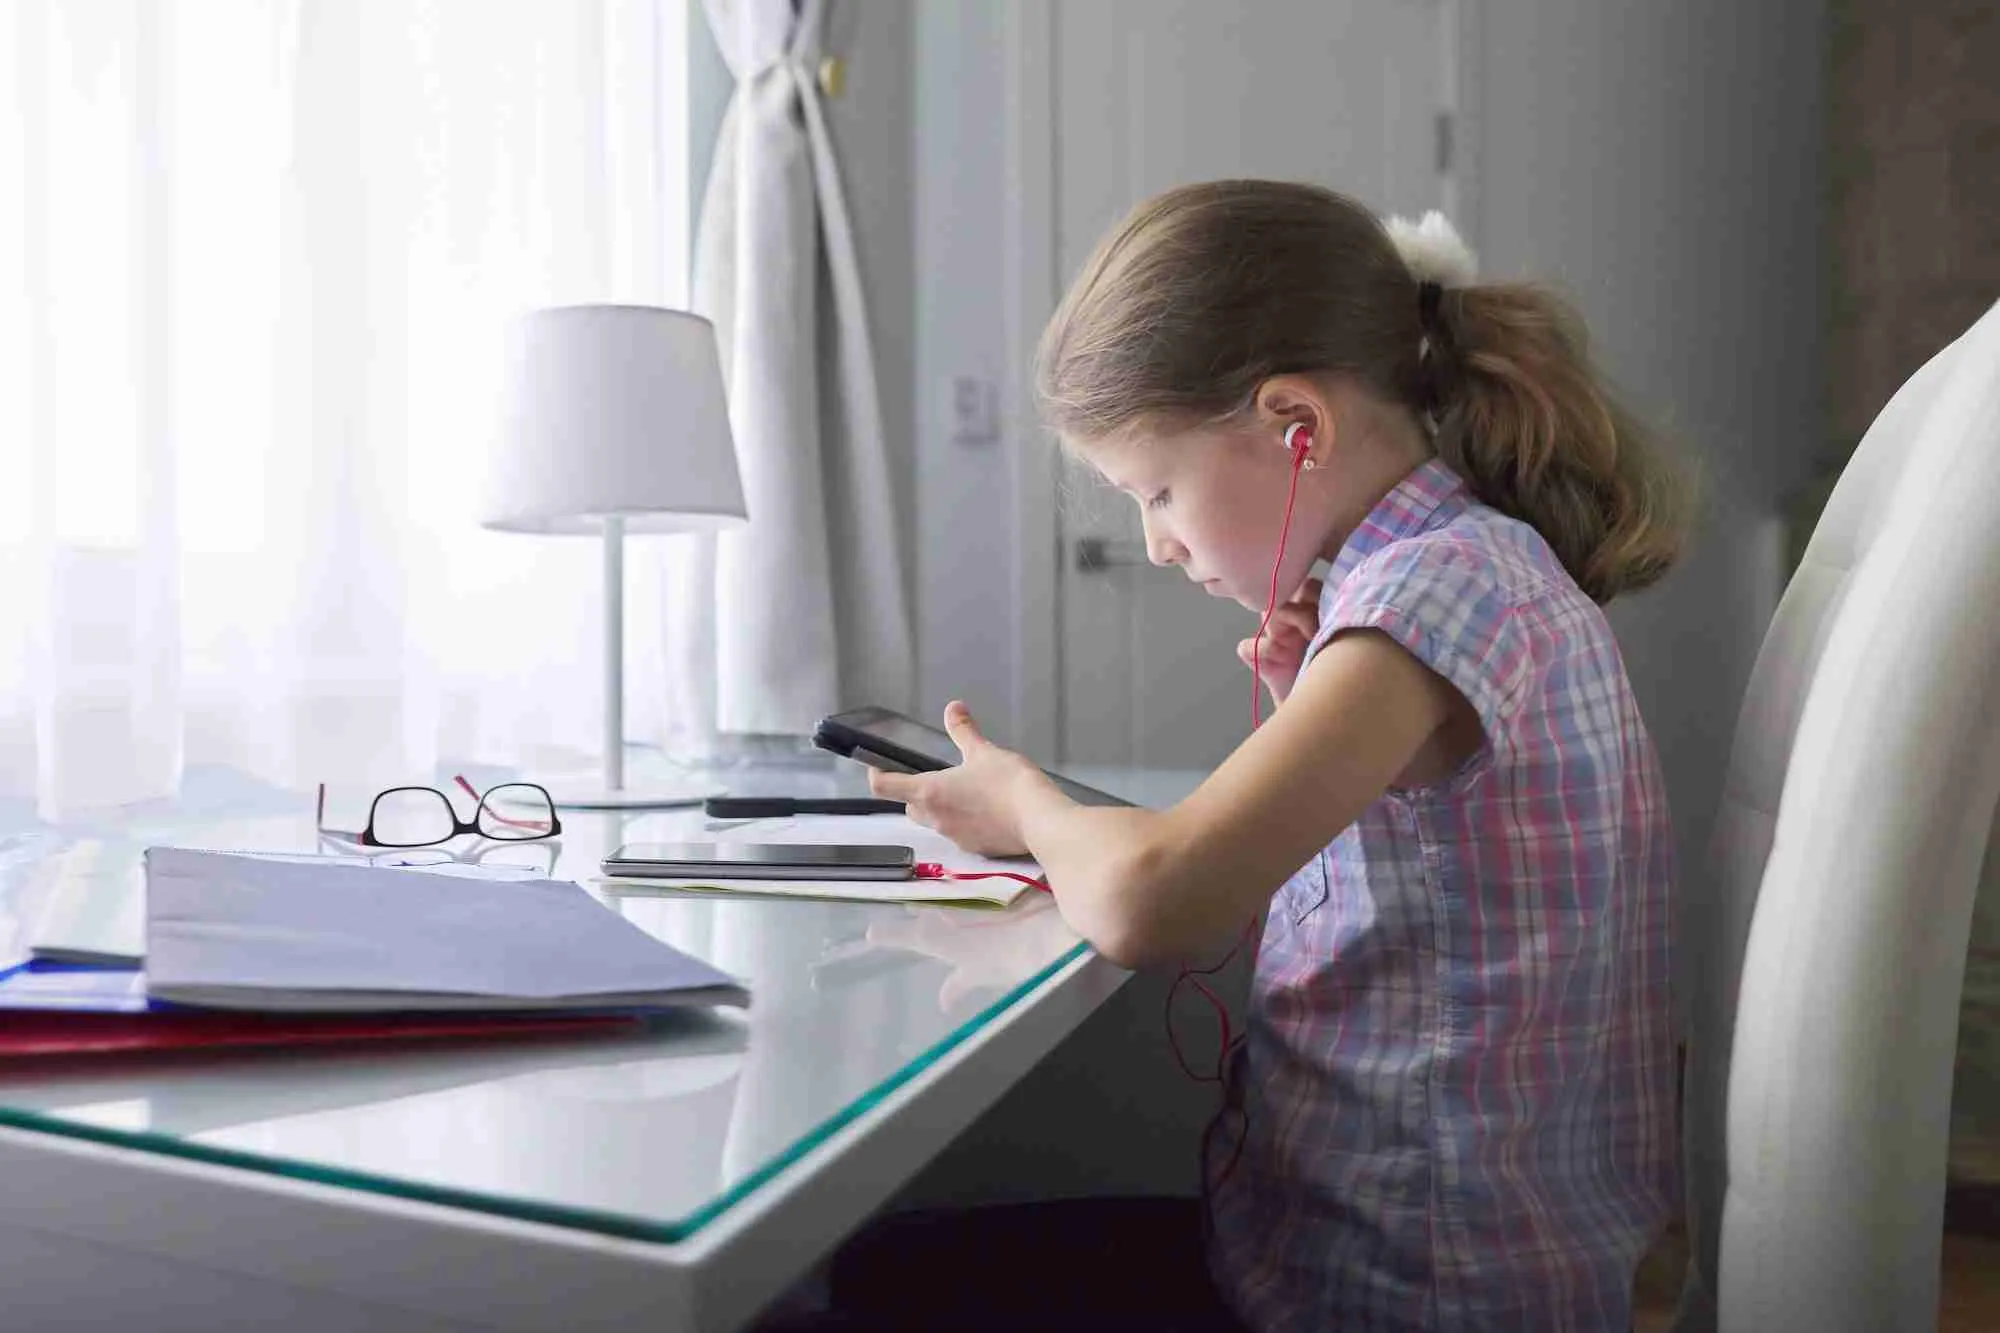 Girl child sitting at home at desk near window with school notebooks and digital tablet